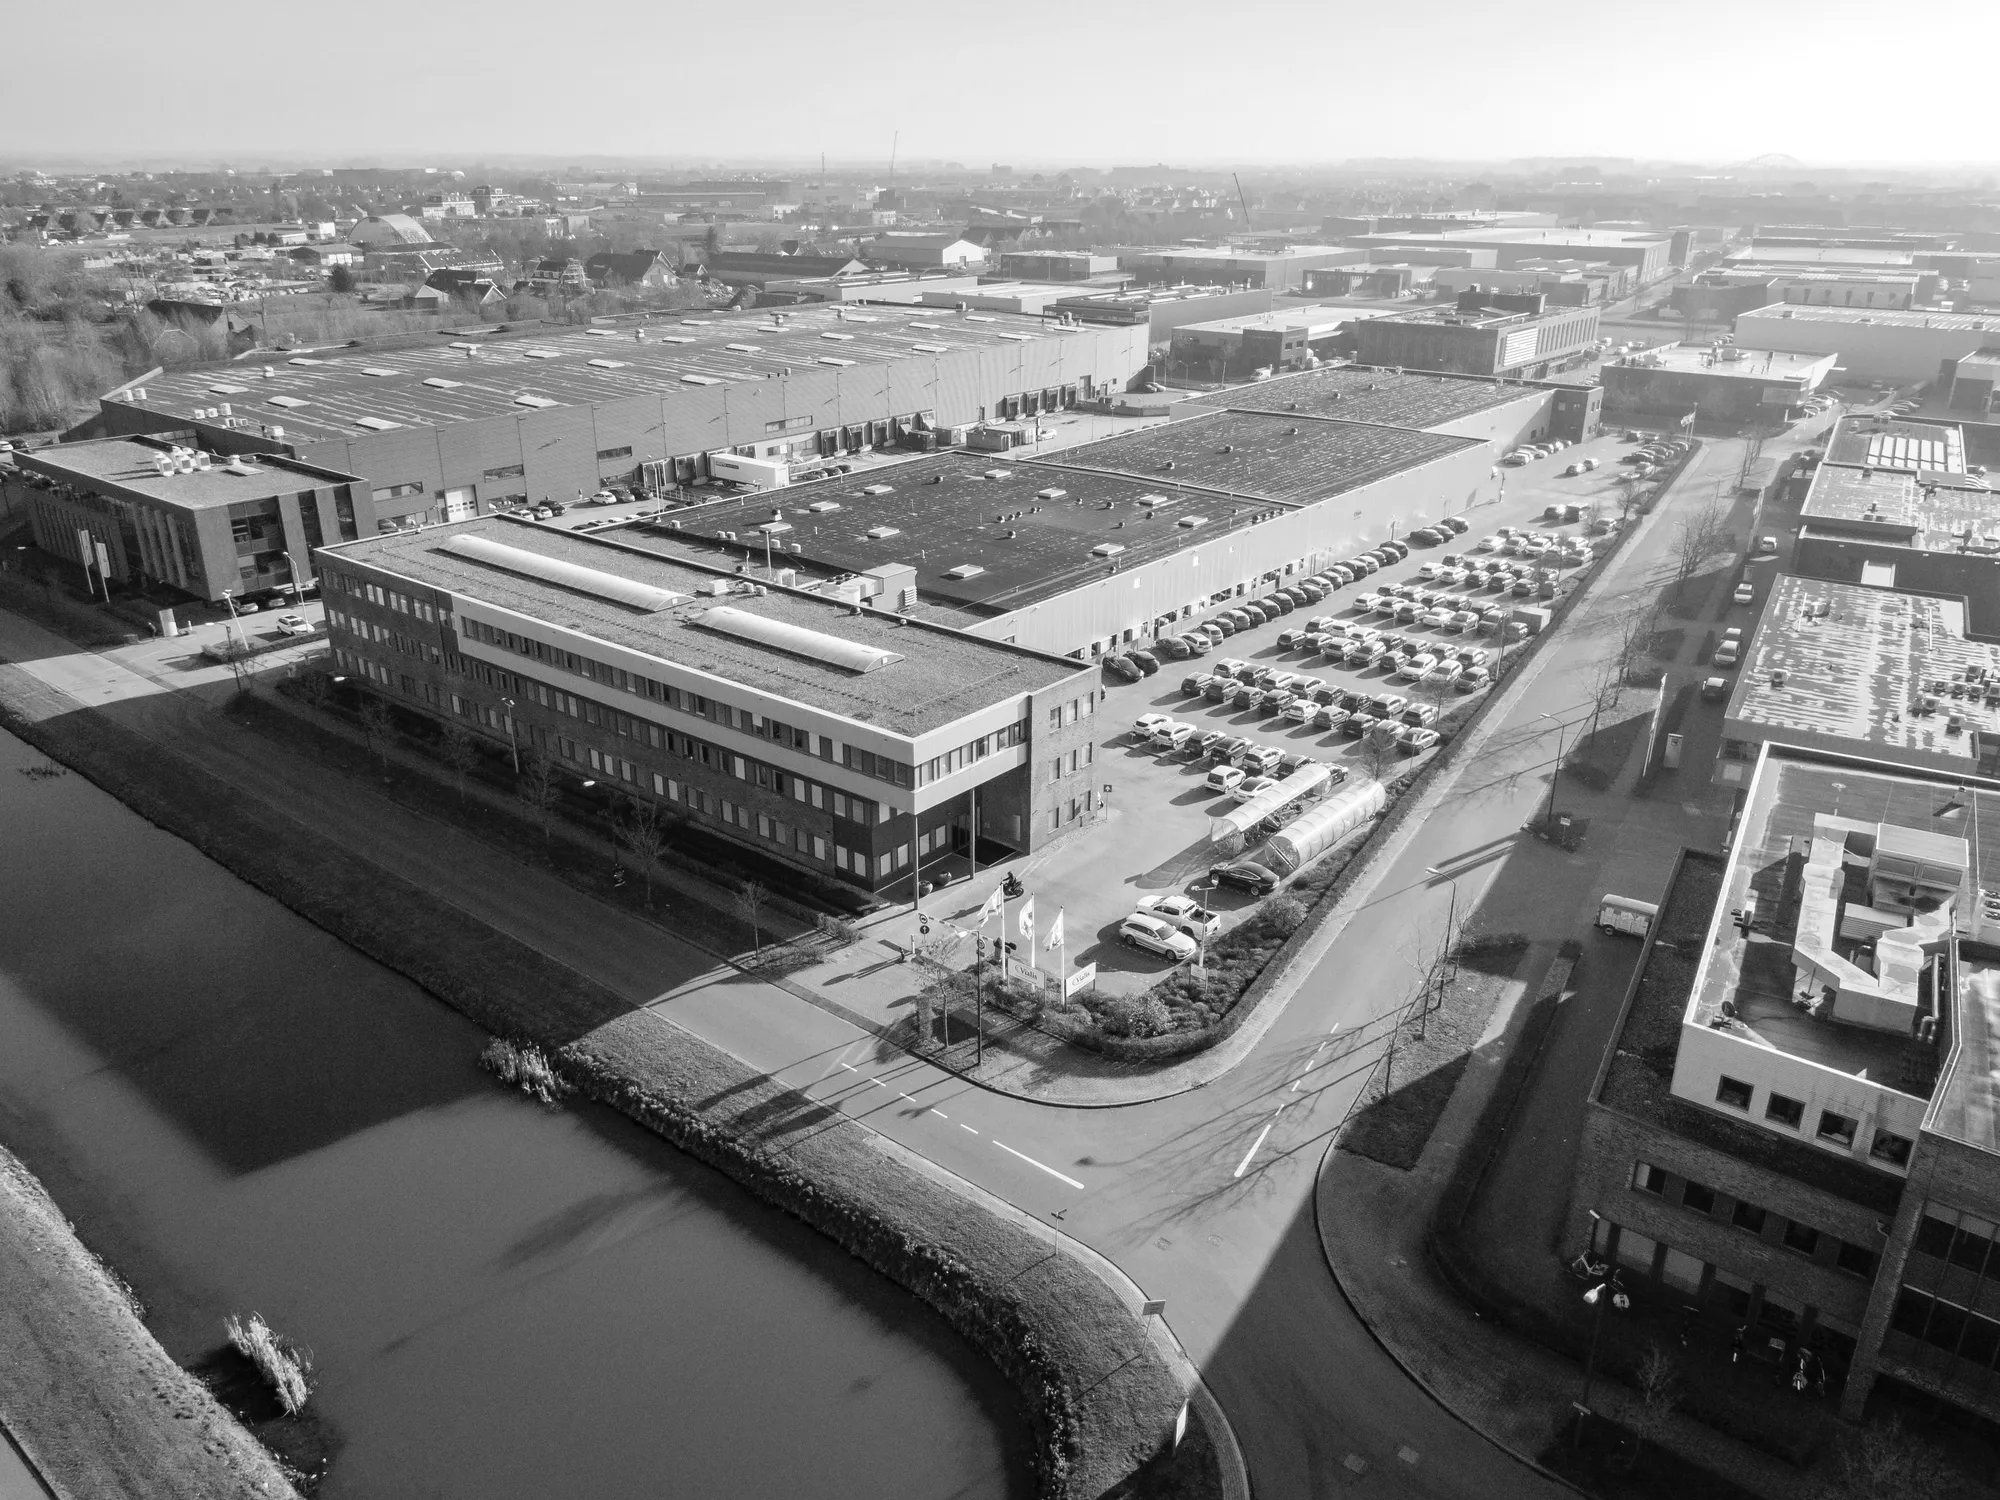 Boreal IM and Cadillac Fairview JV Acquires 15 Dutch Warehouses